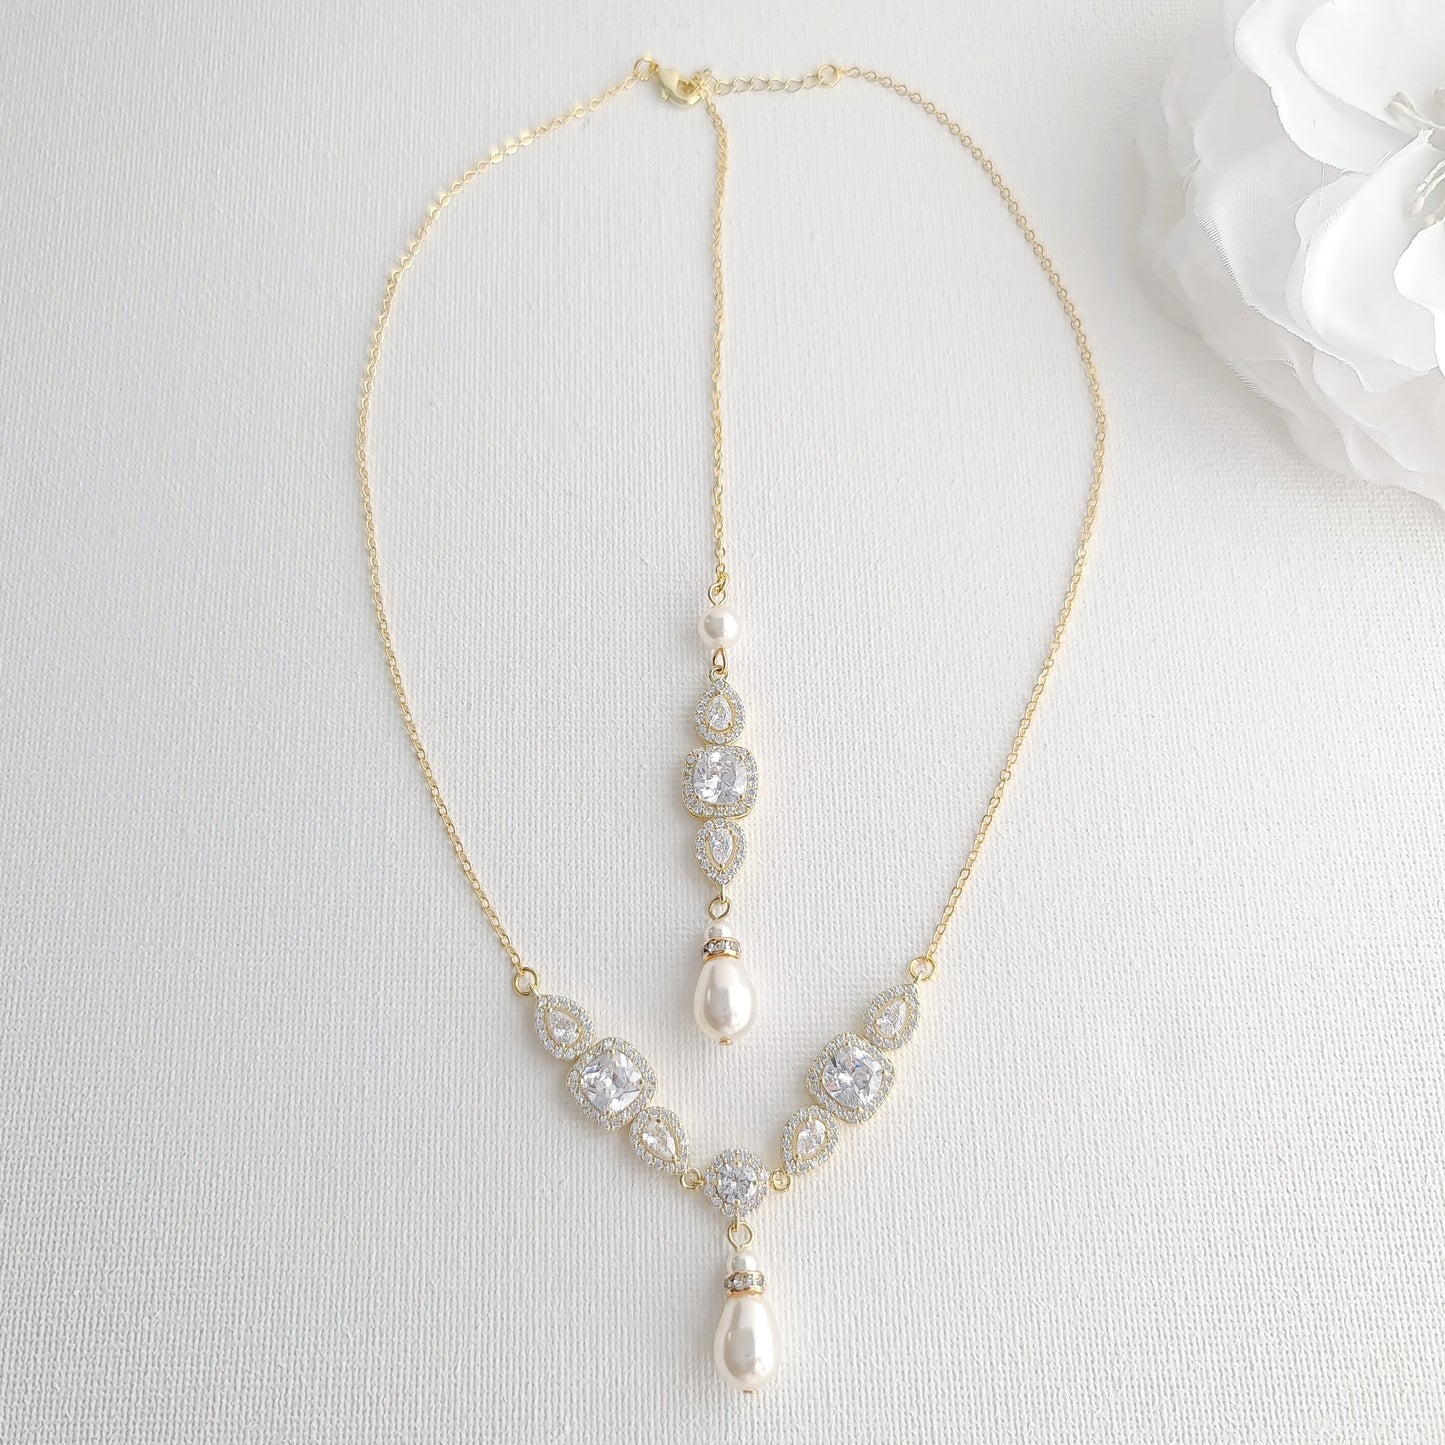 Gold Necklace for Brides with Pearl Drops-Gianna